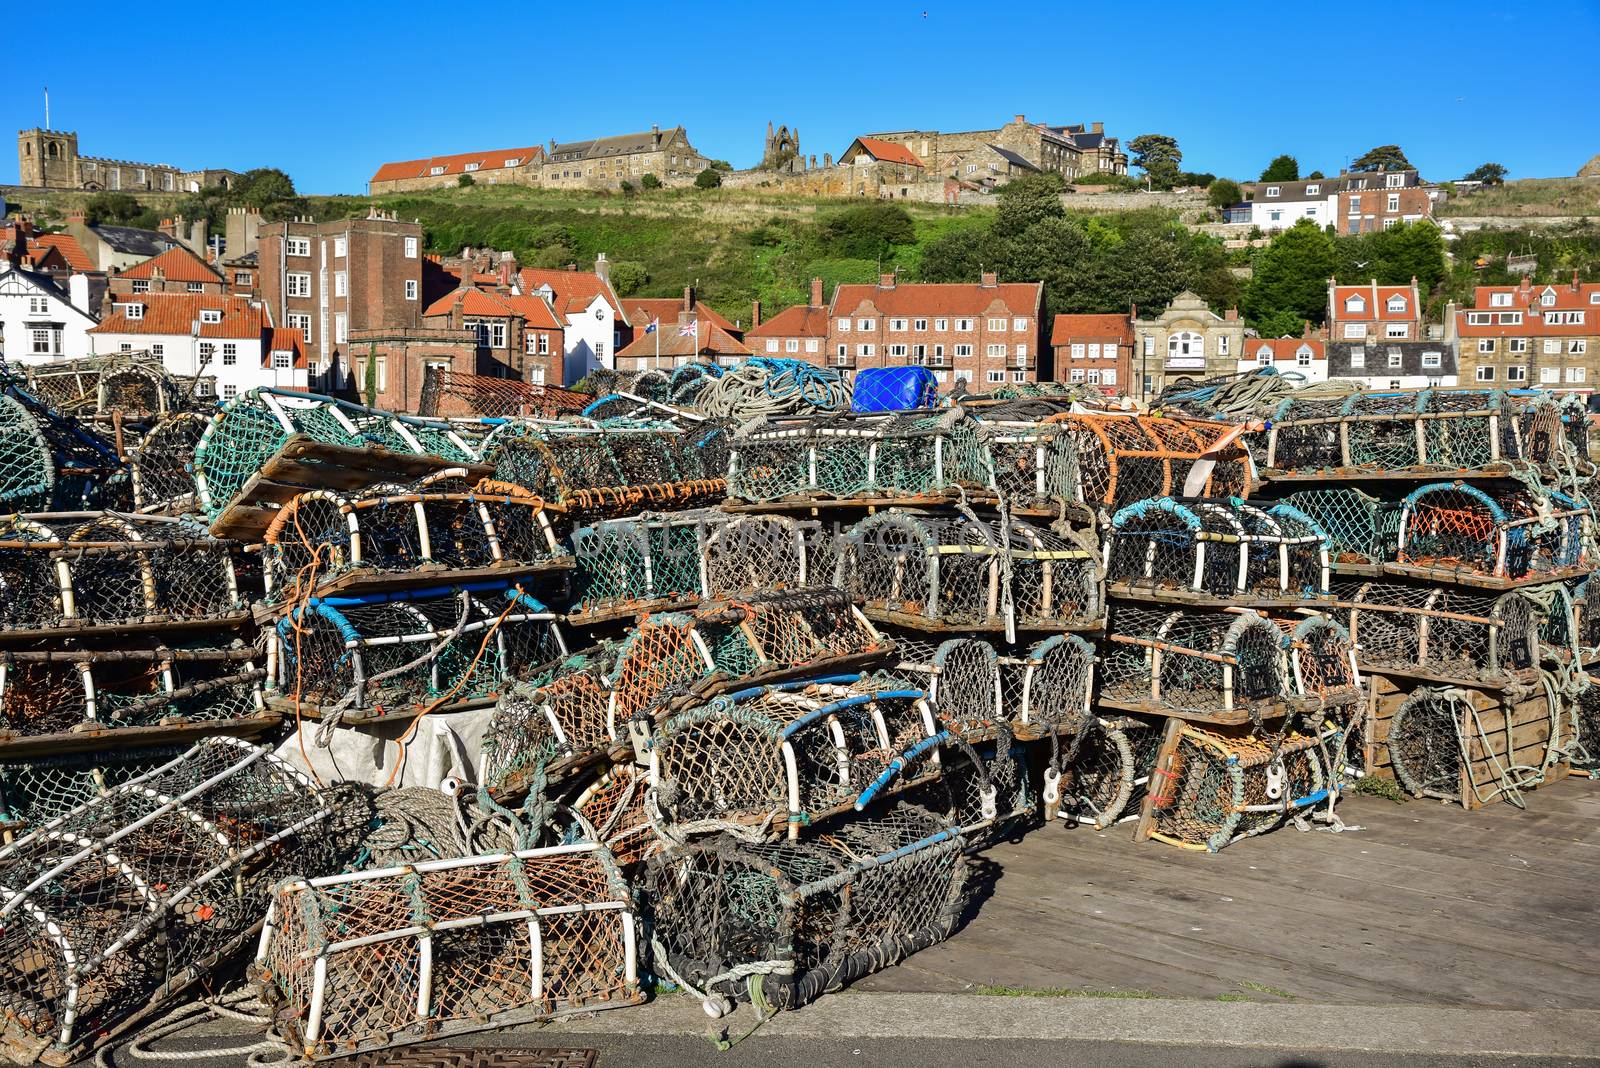 Colourful lobster pots standing on the quayside in Whitby, North Yorkshire, England.